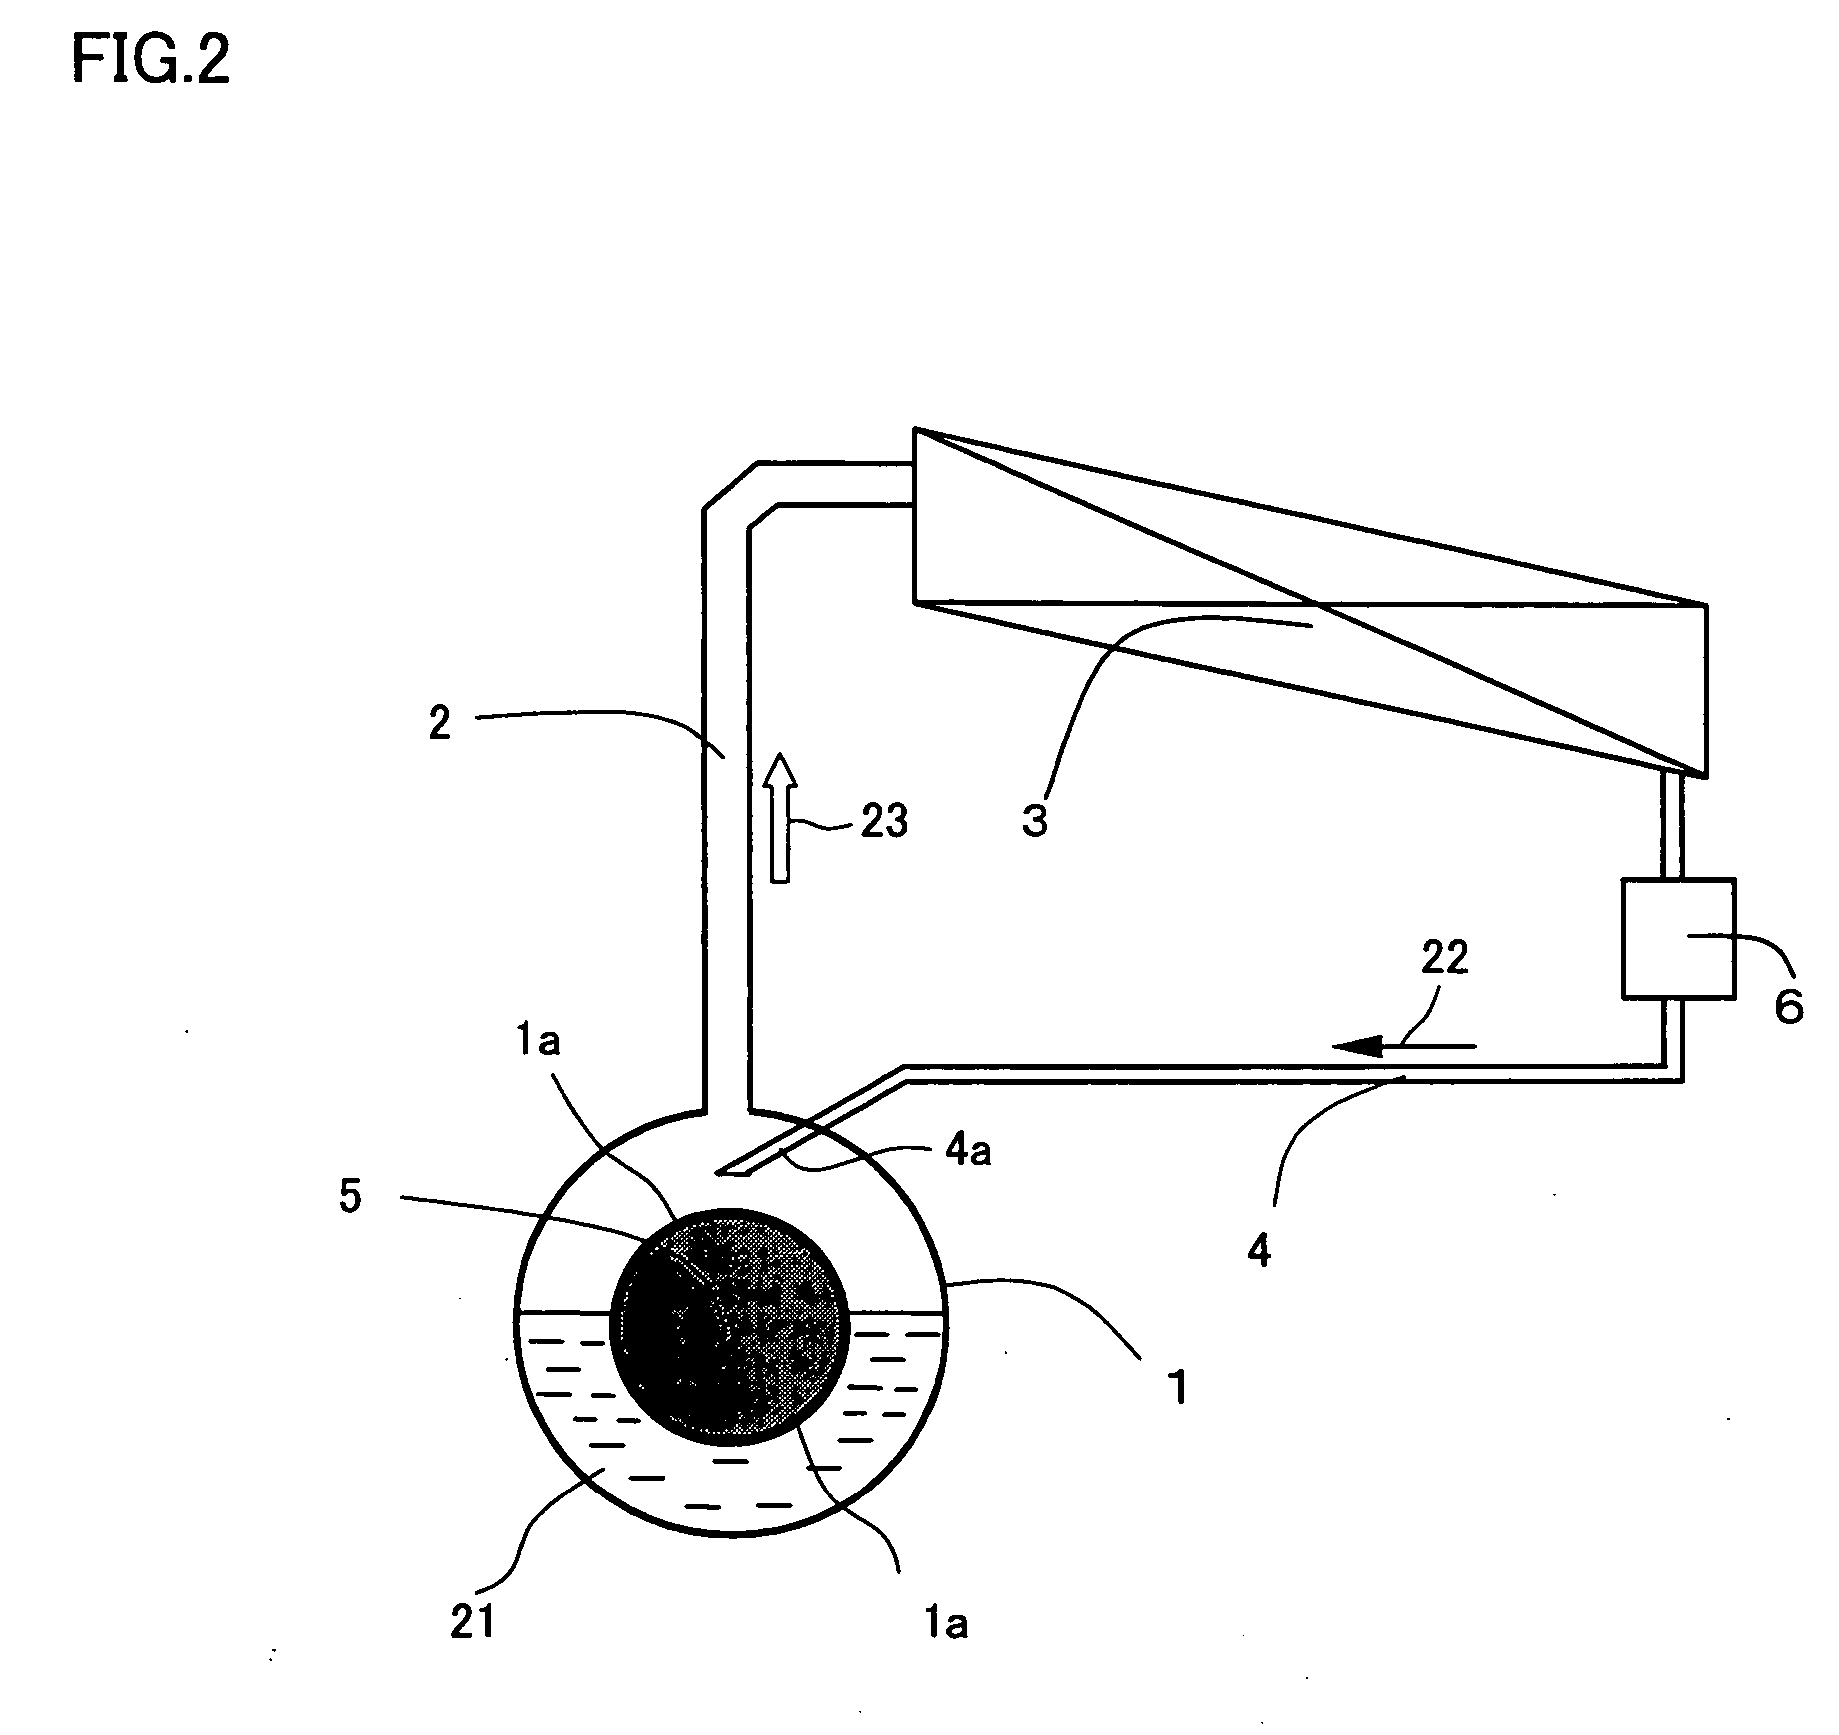 Loop-type thermosiphon and stirling refrigerator